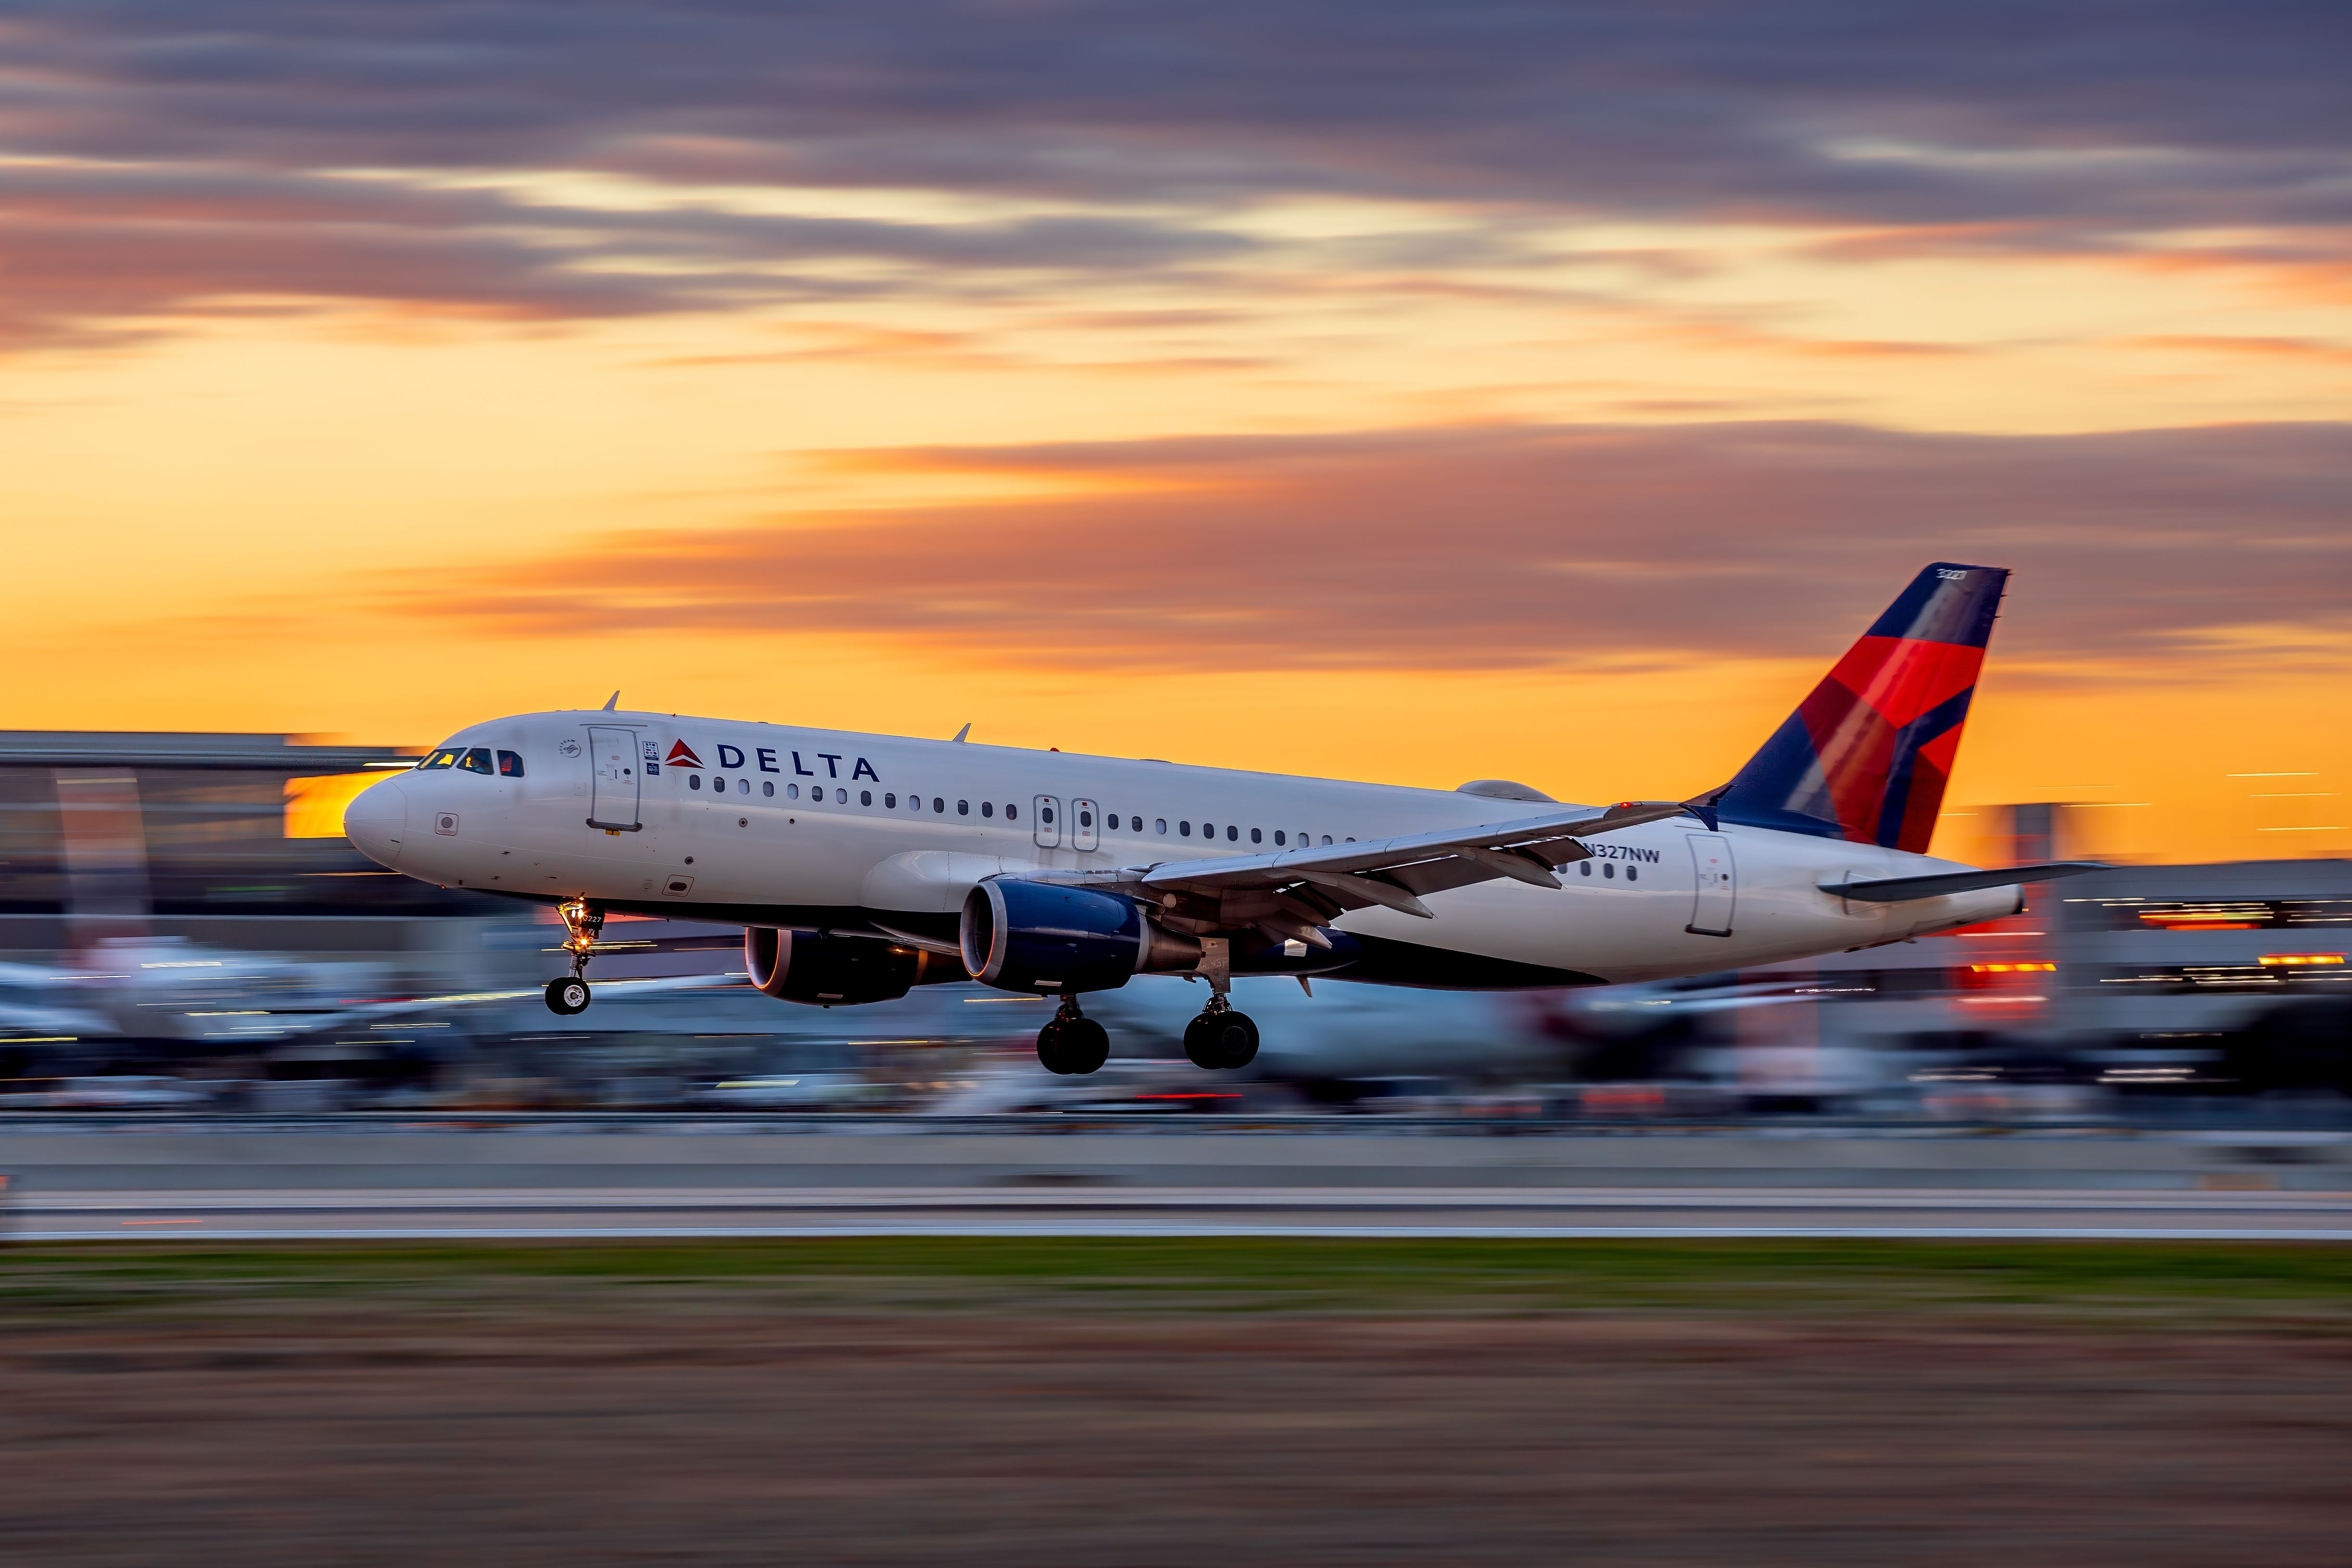 A Delta Air Lines Airbus A320 Landing In Austin At Sunset.